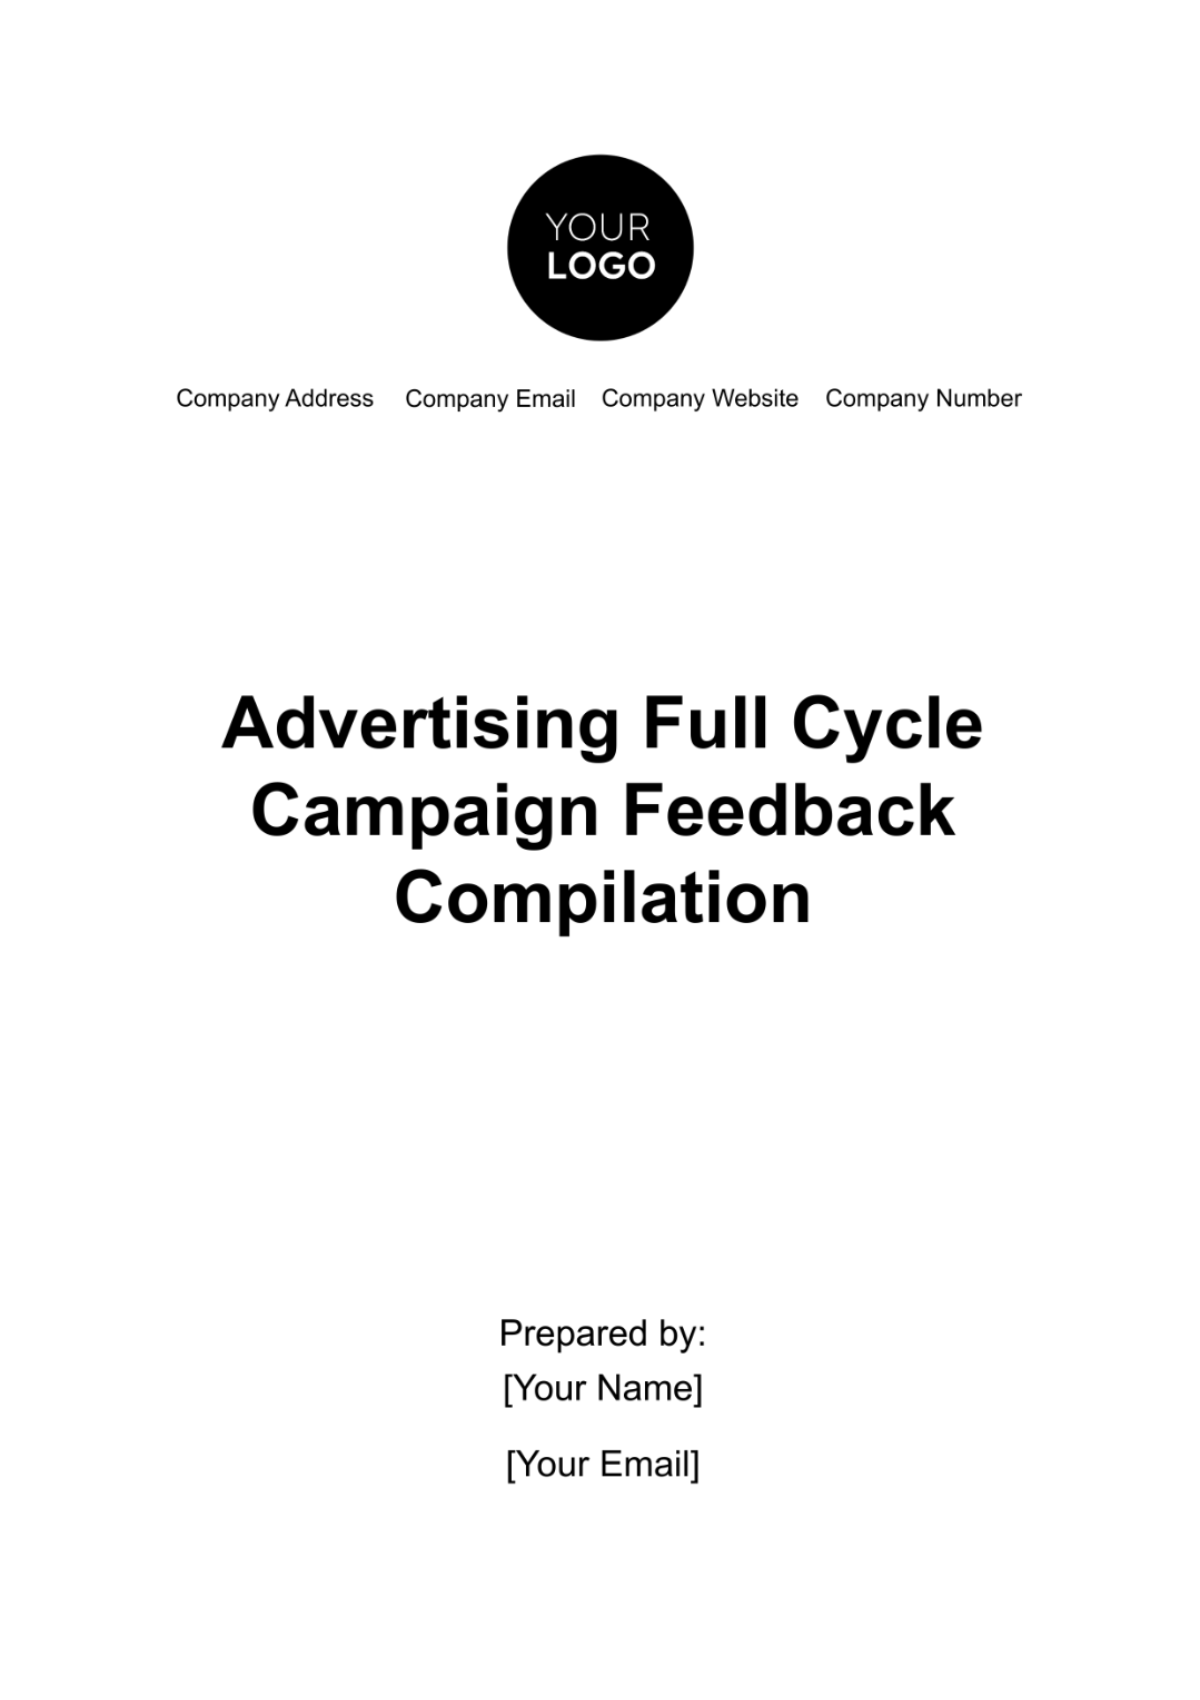 Advertising Full Cycle Campaign Feedback Compilation Template